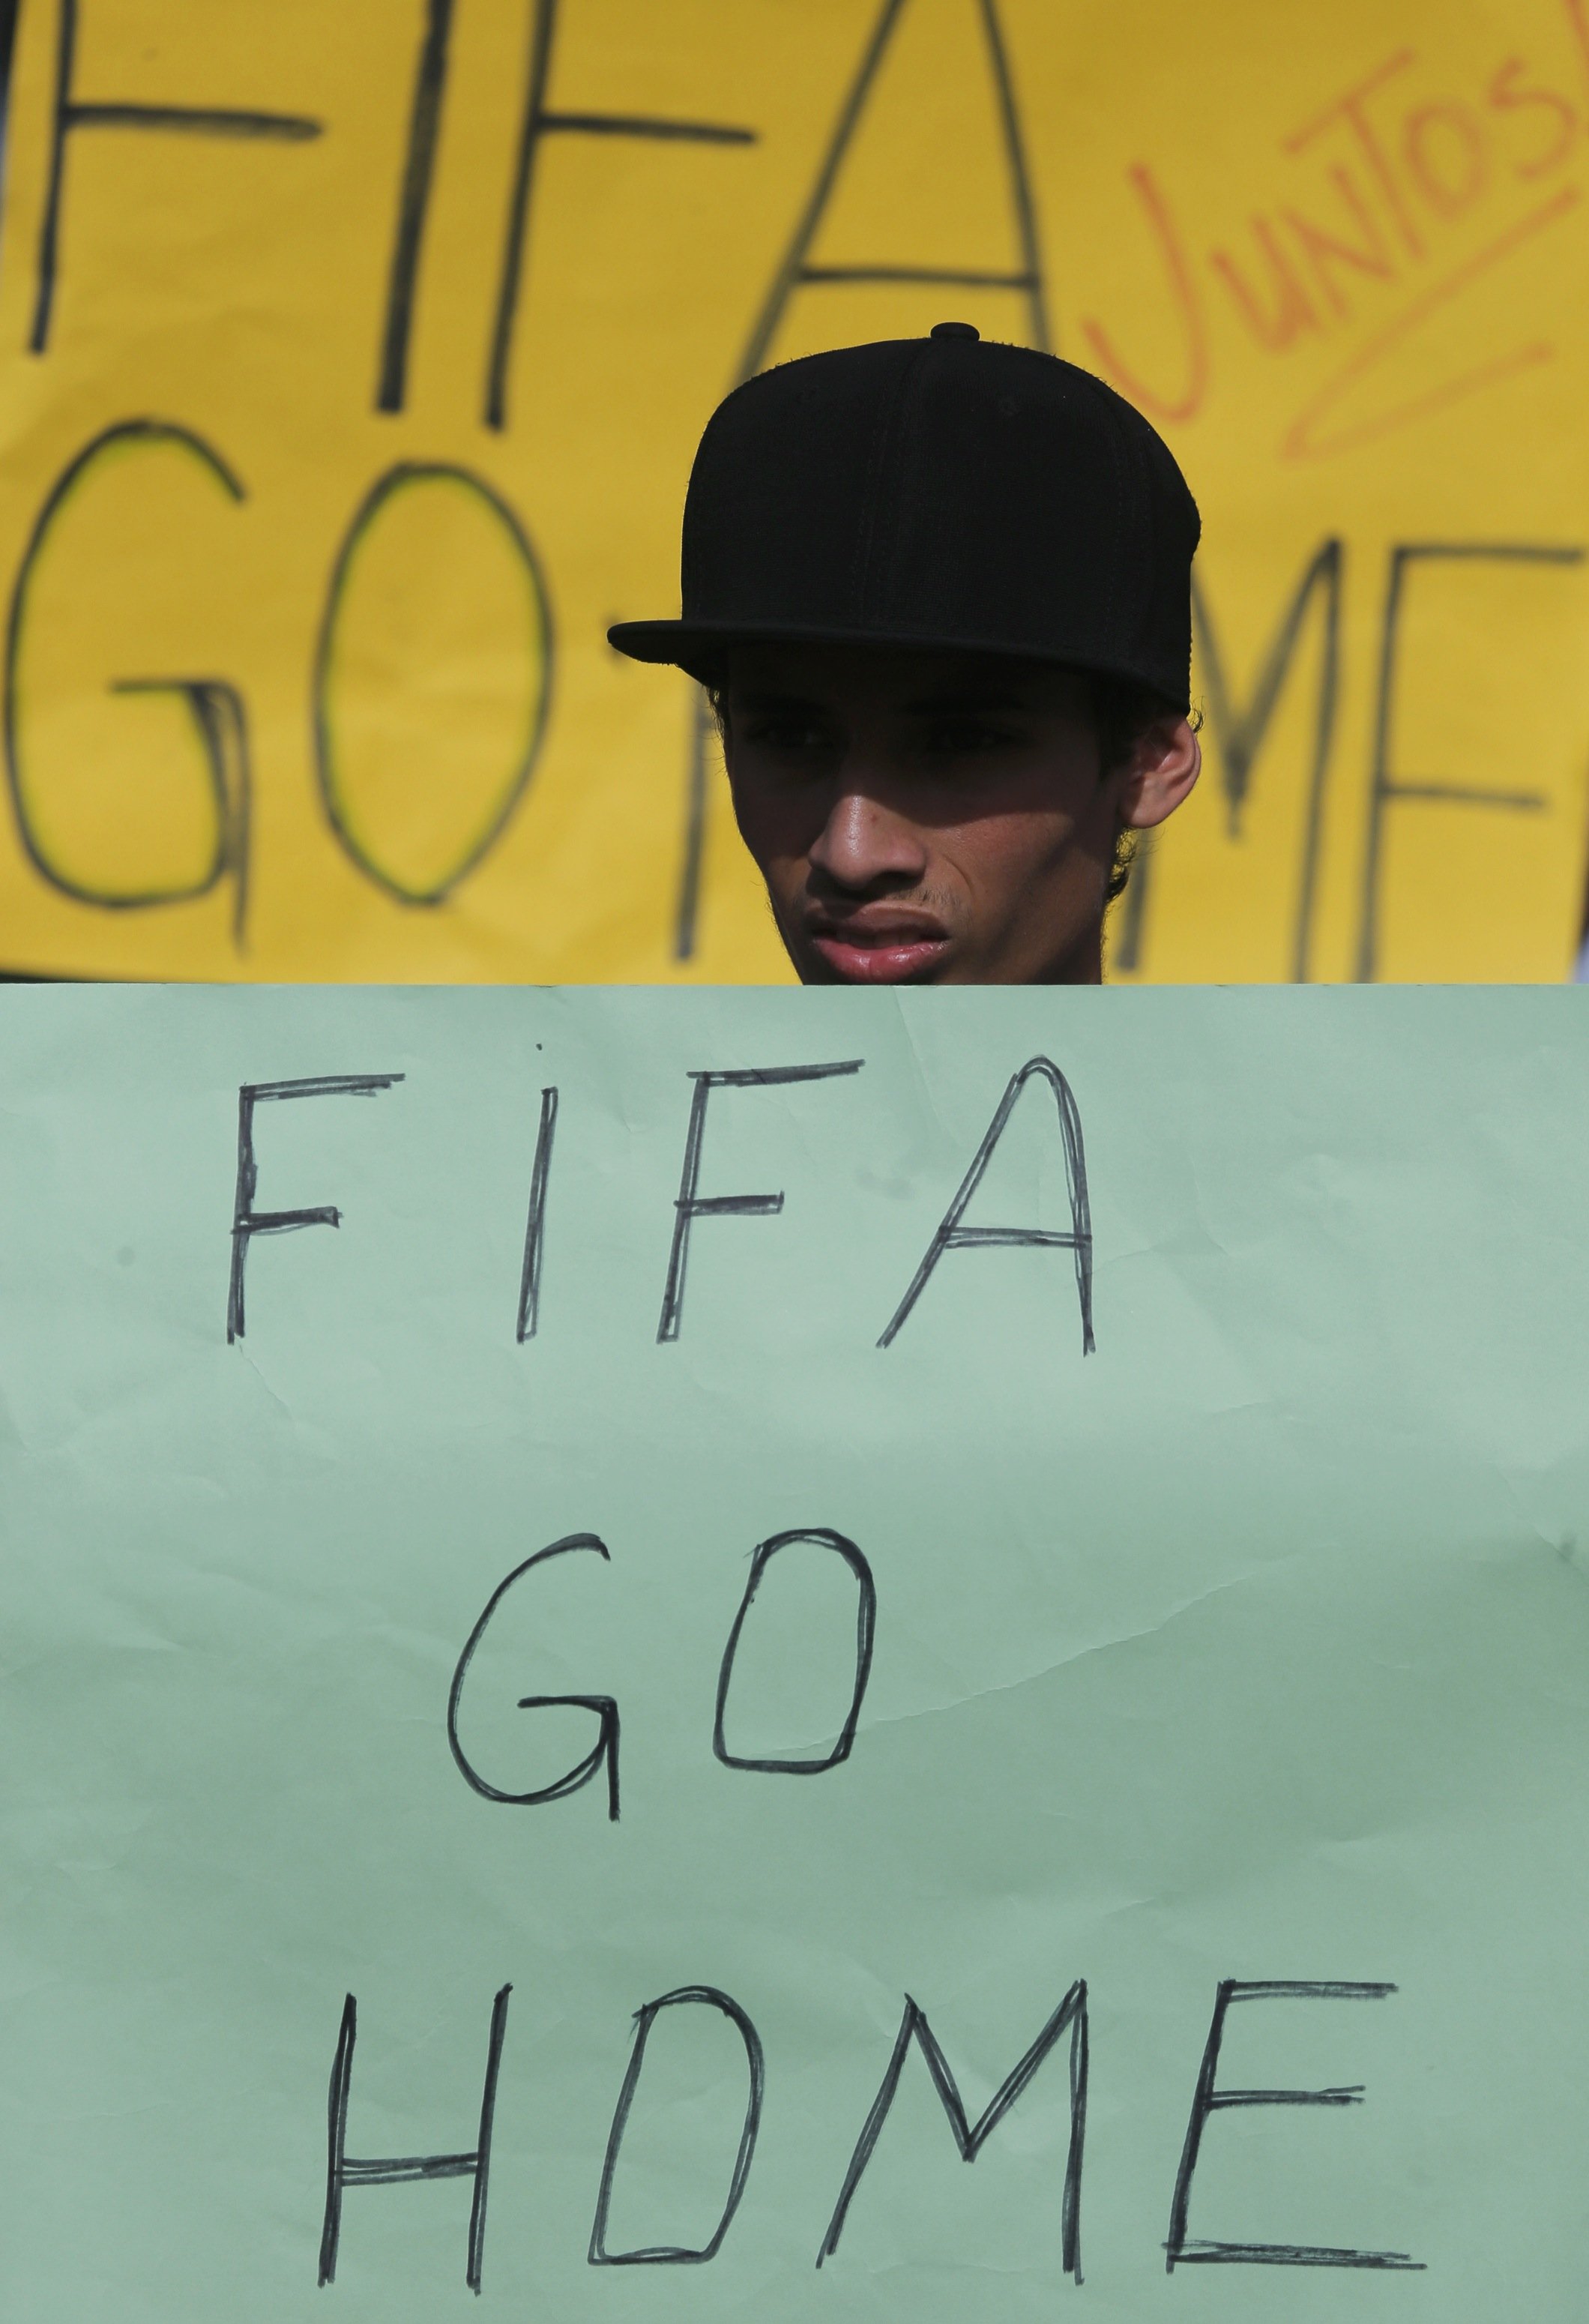 An activist holds a protest poster in front of the municipal stadium prior to a training session by Japan's national soccer in Sorocaba